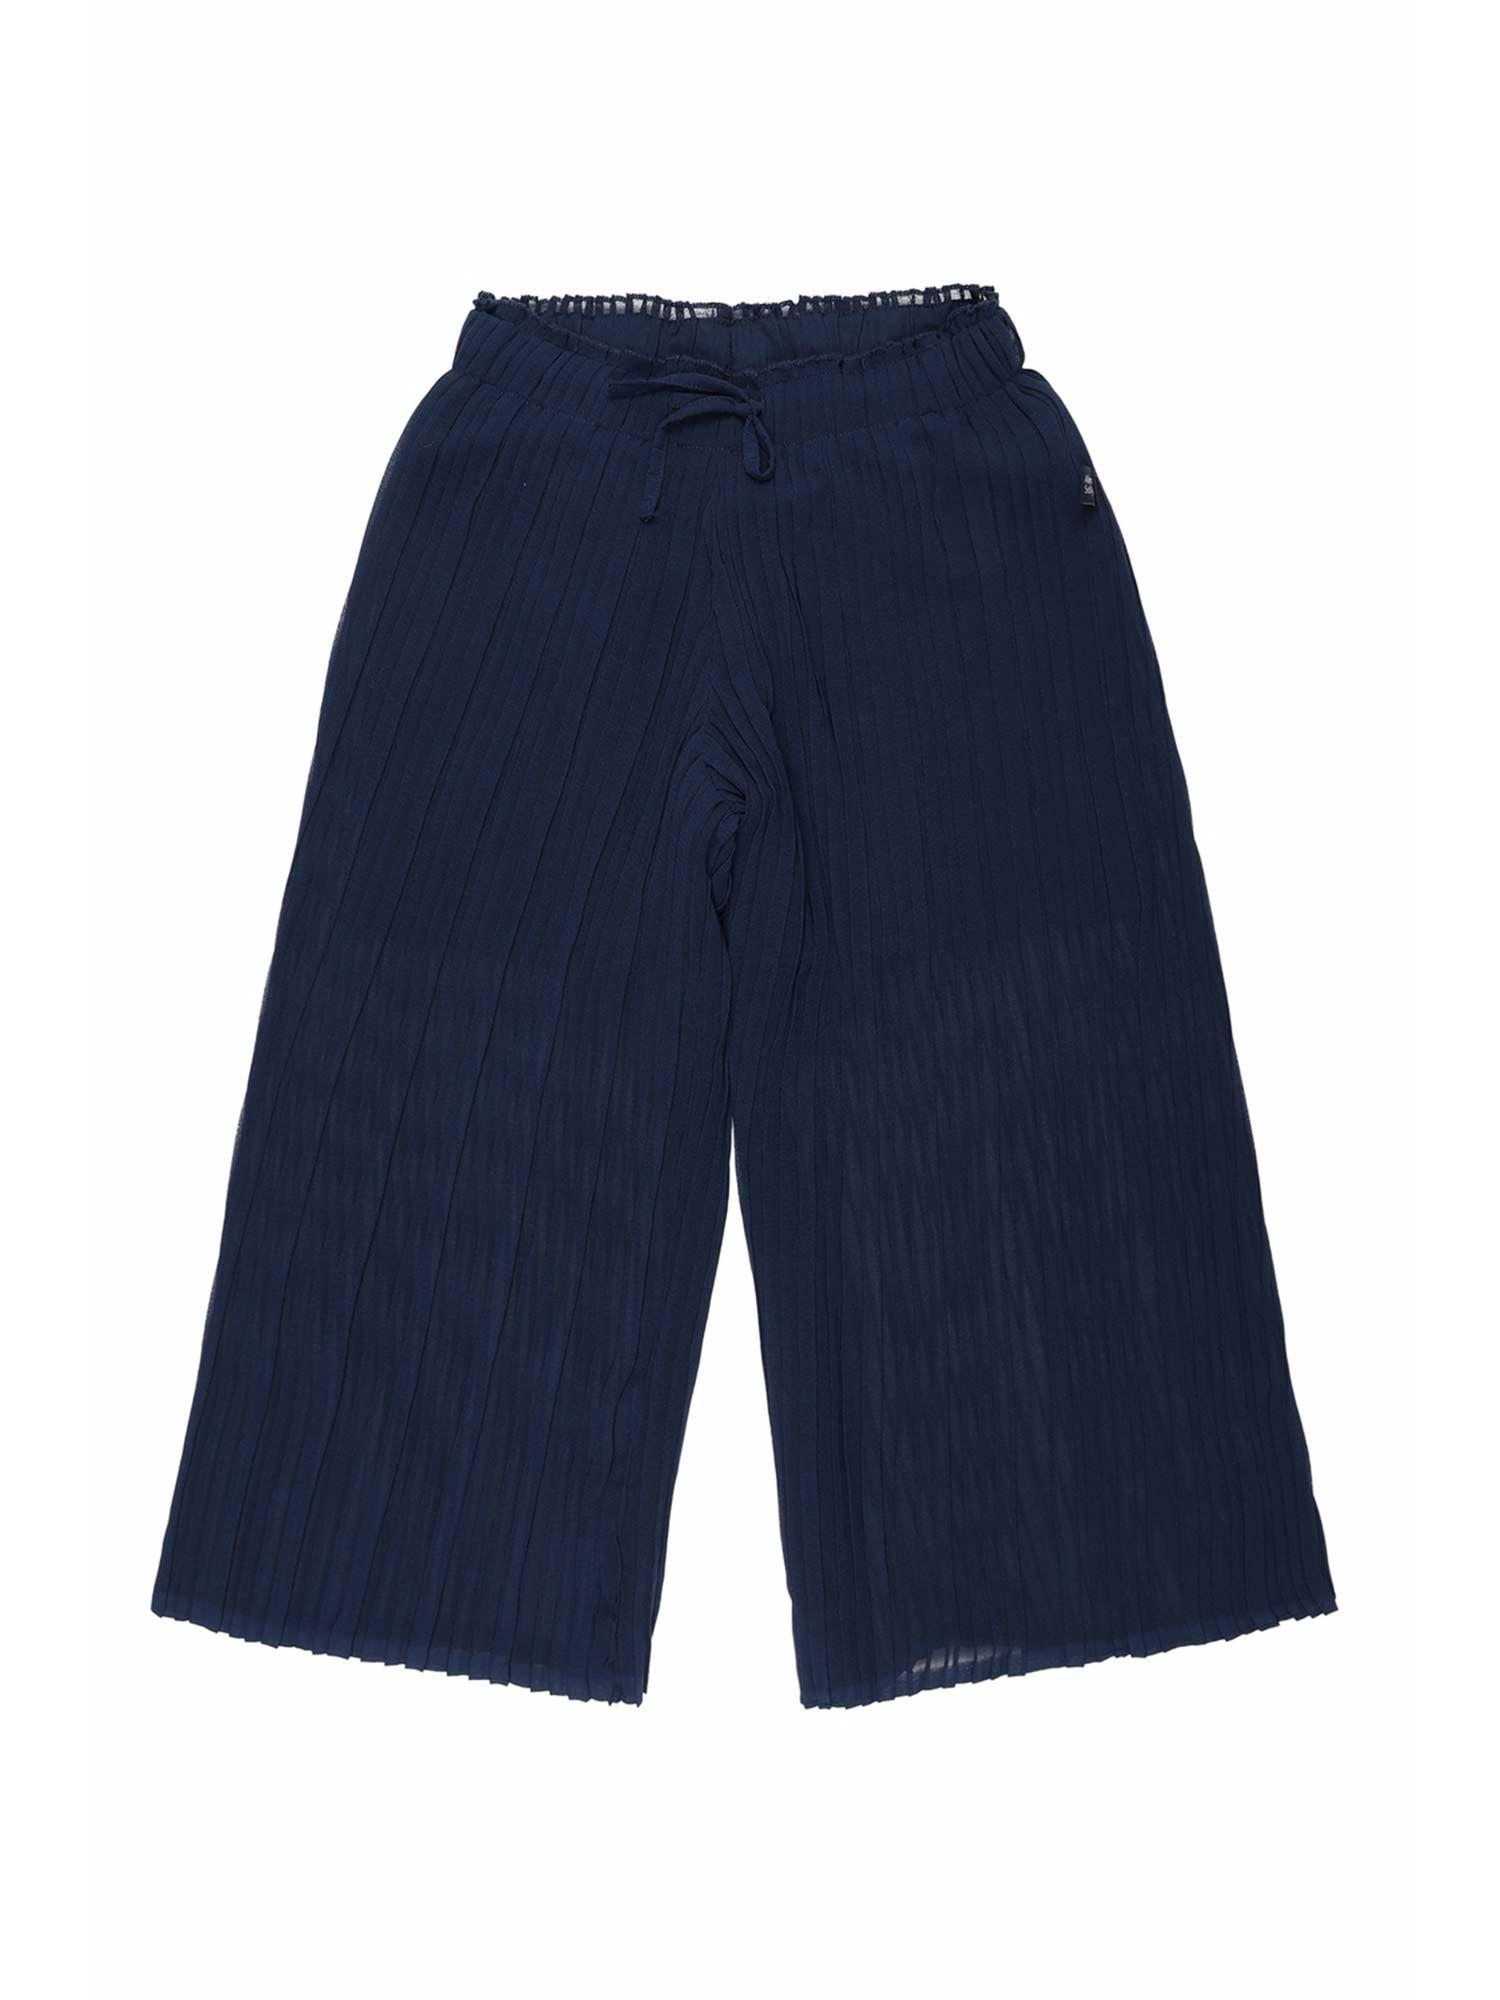 girls-navy-blue-solid-trousers